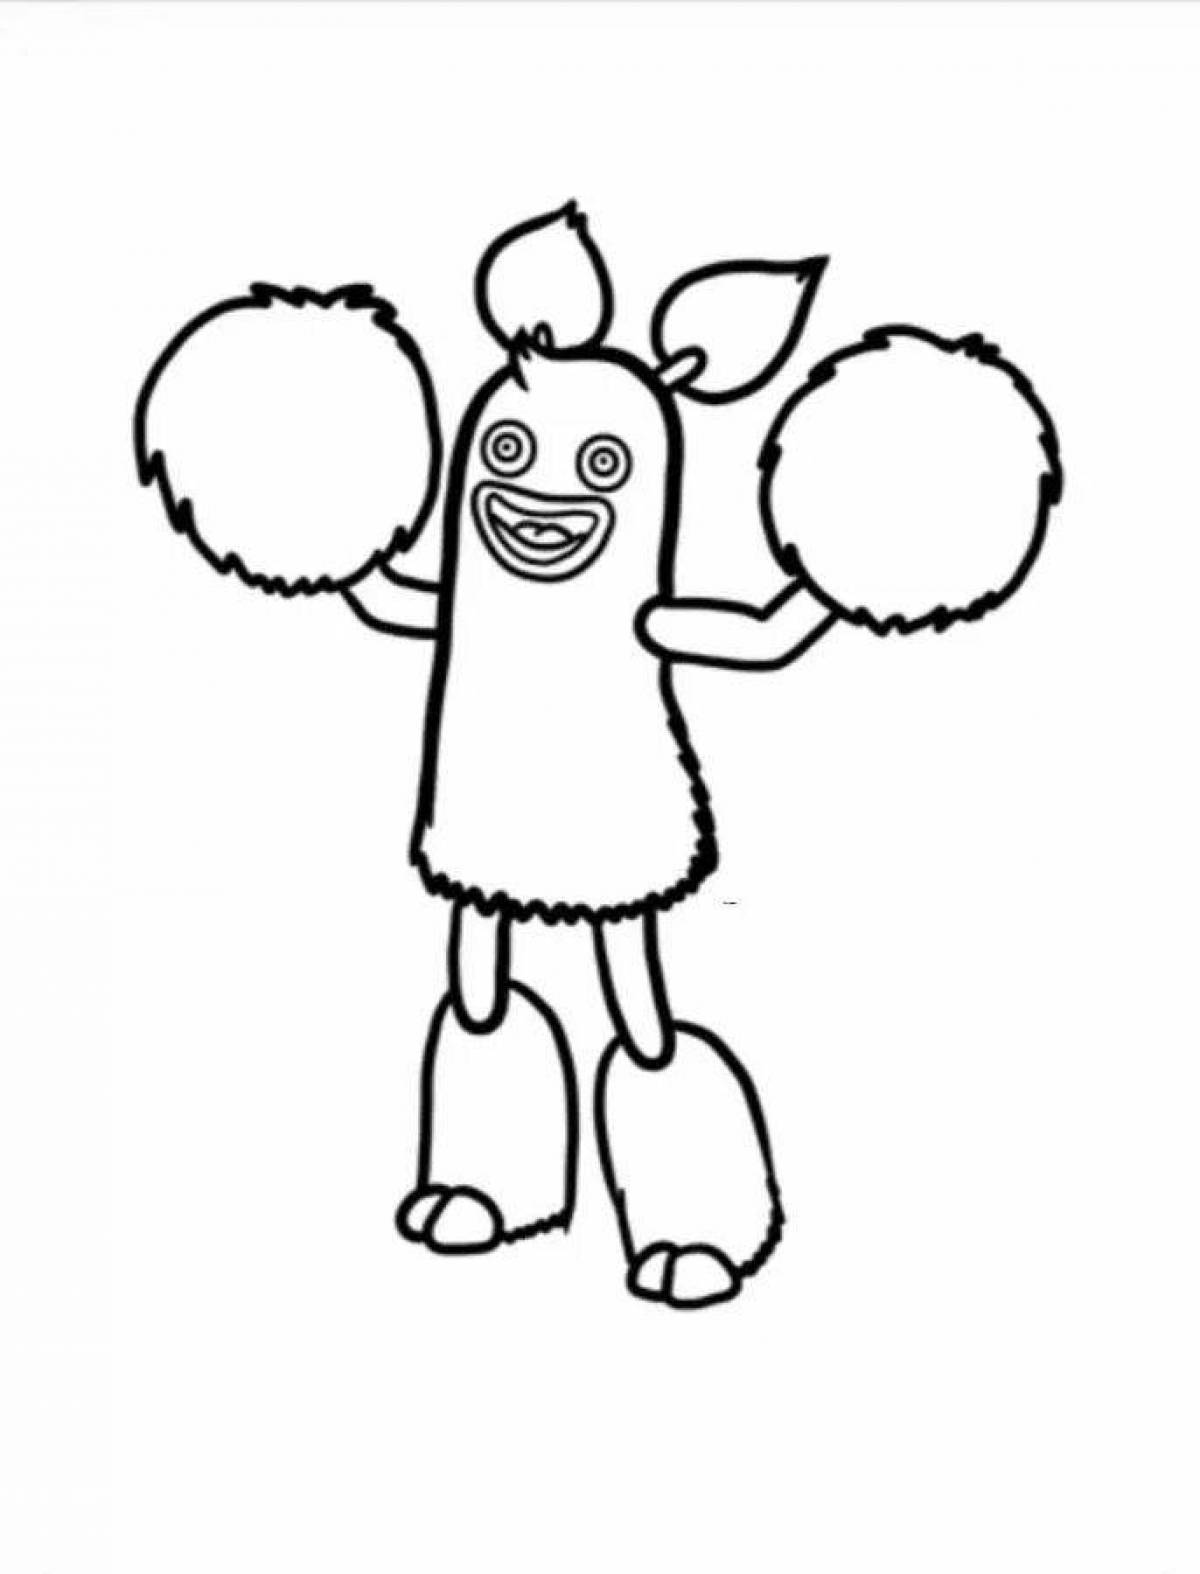 May's Gorgeous Singing Monster Coloring Page